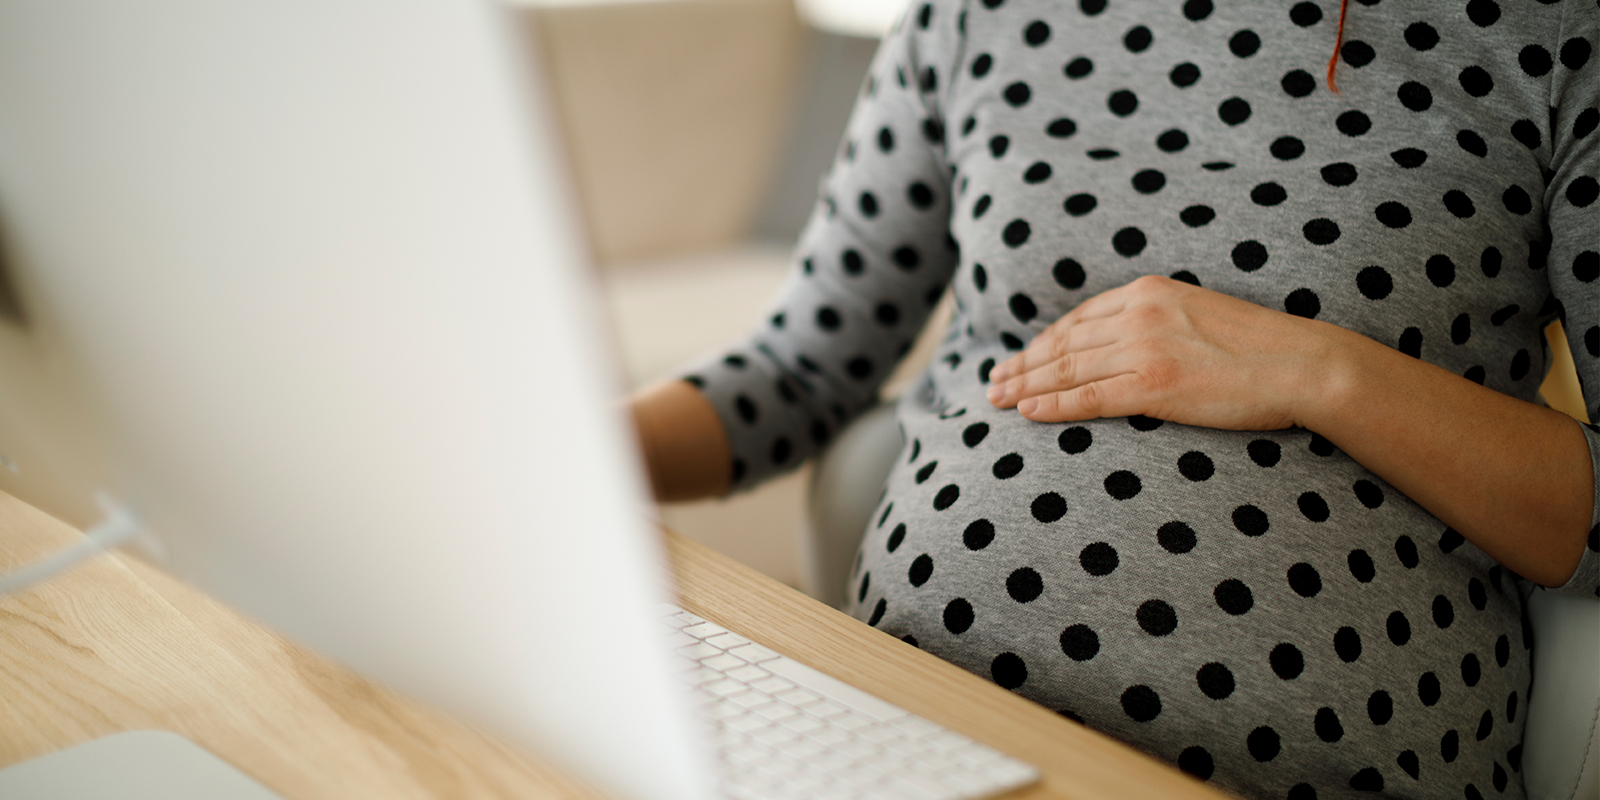 Pregnant workers to gain protections under House-passed bill 